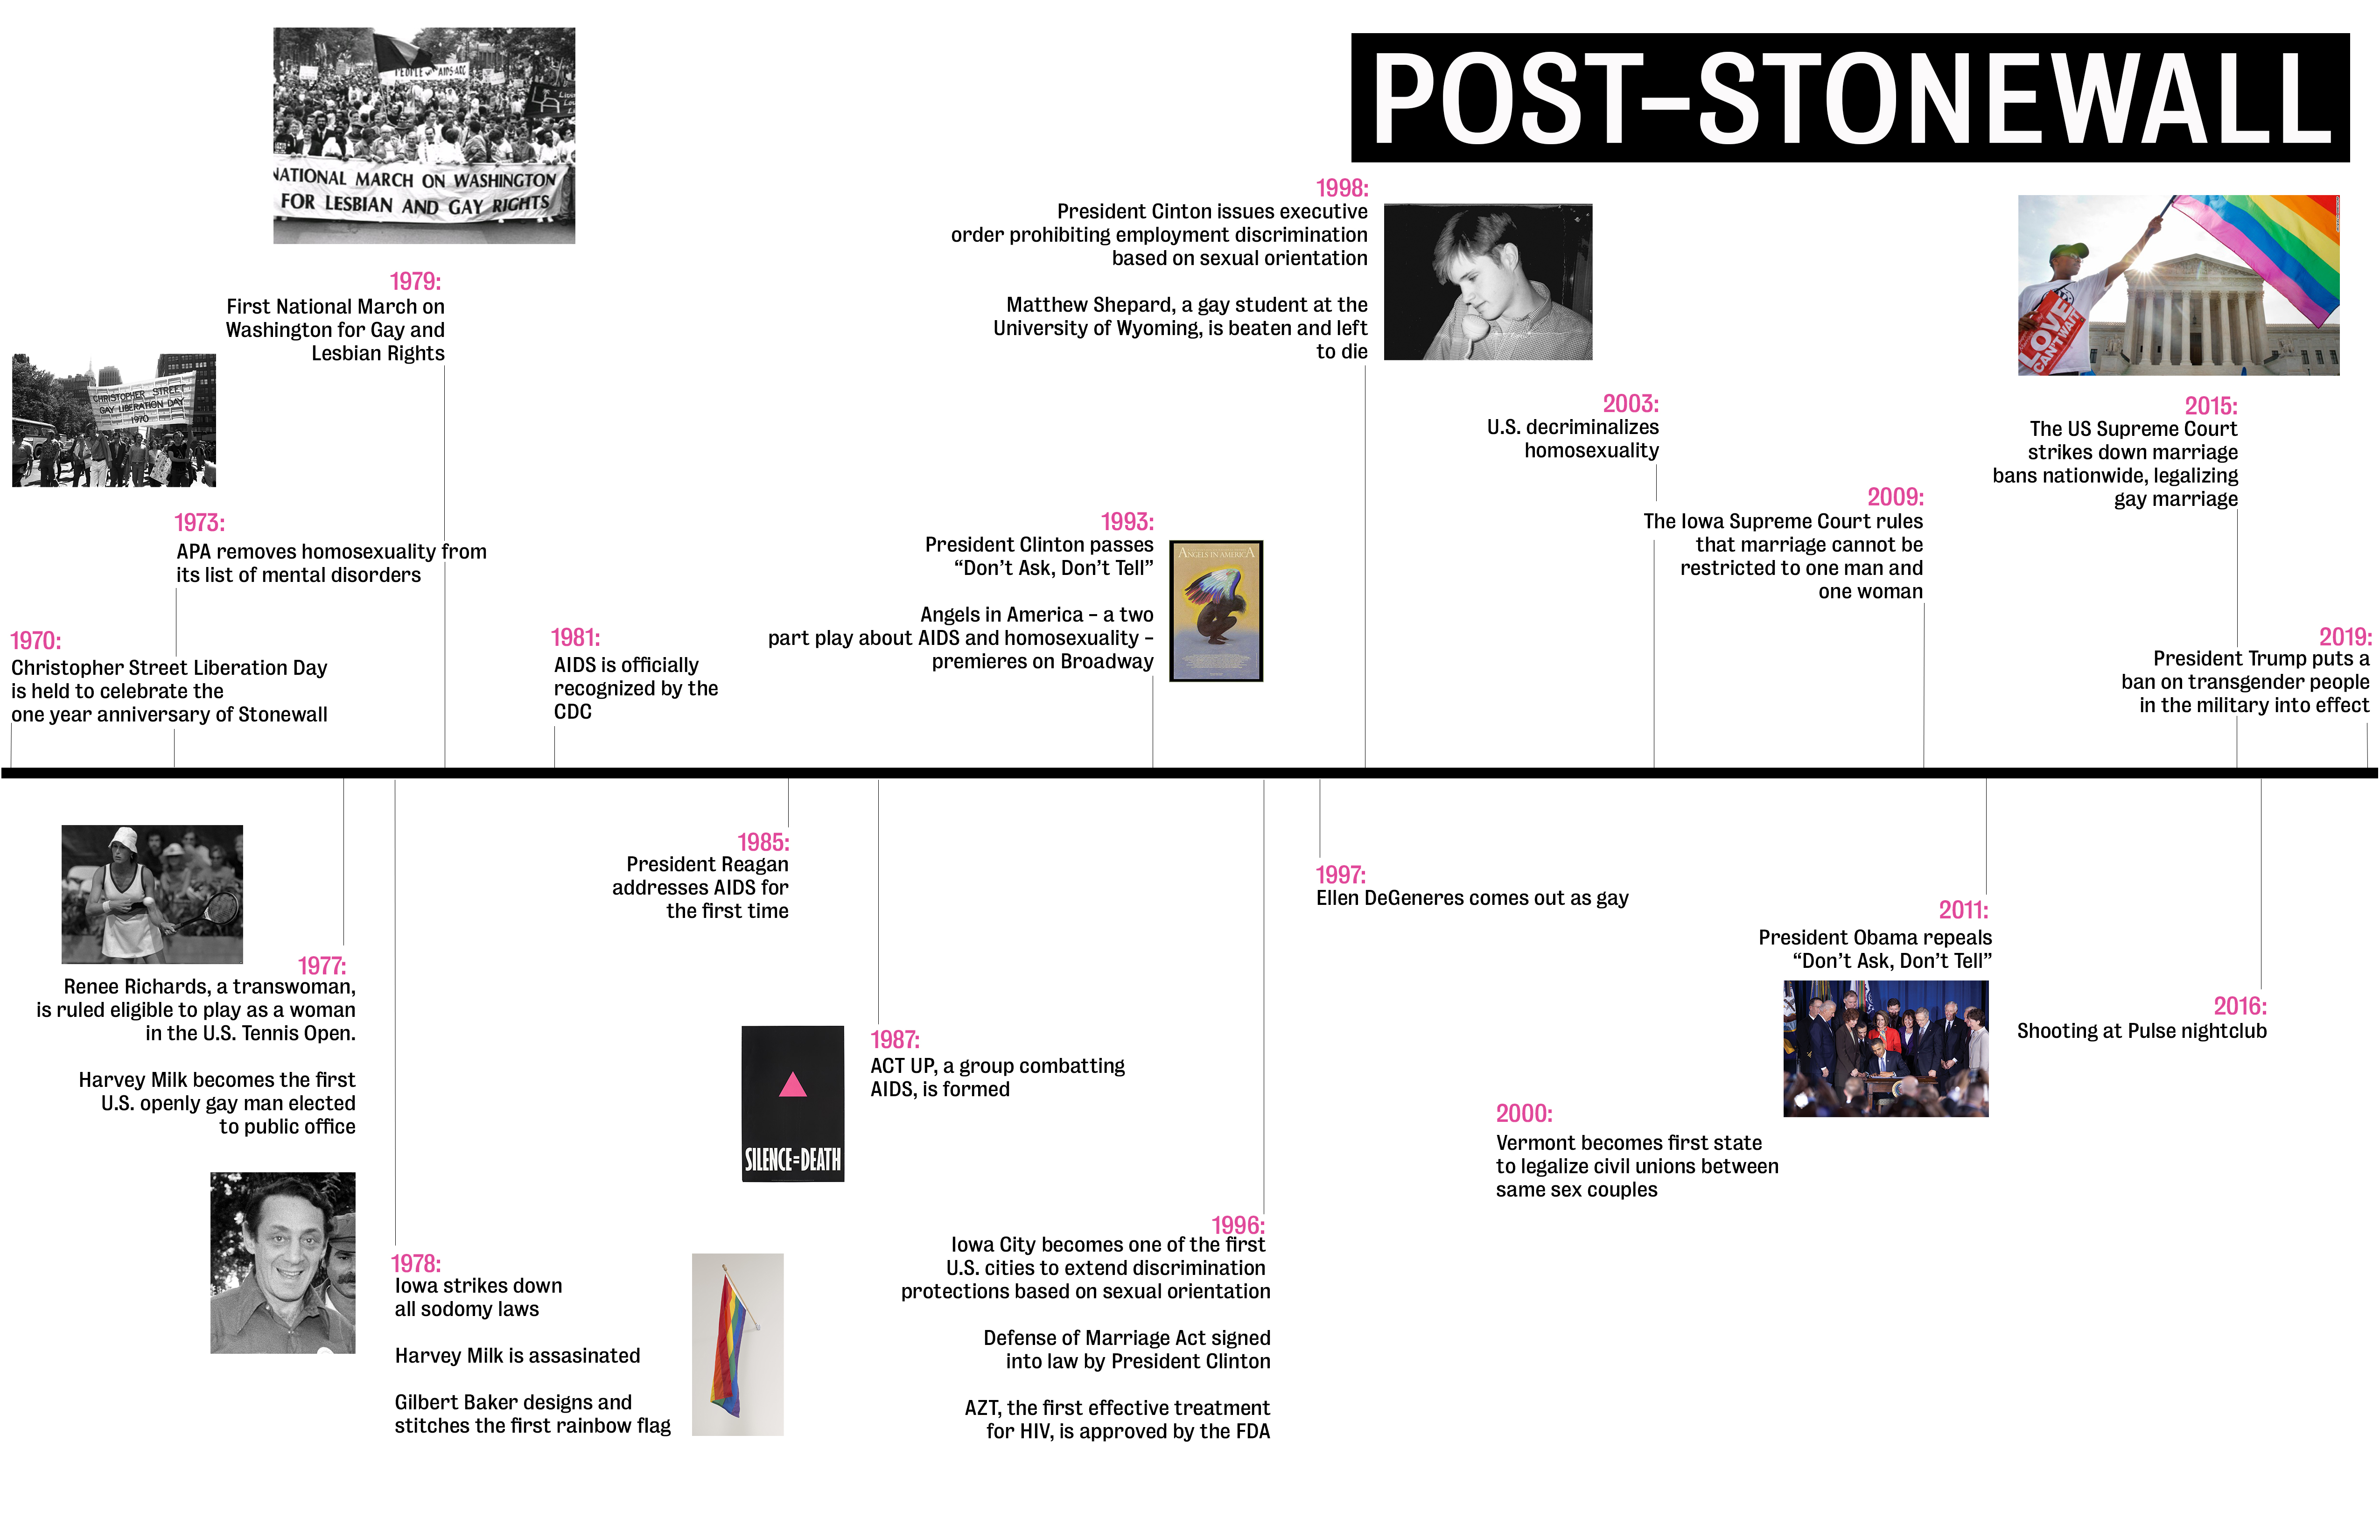 Timeline of LGBTQ events post-Stonewall